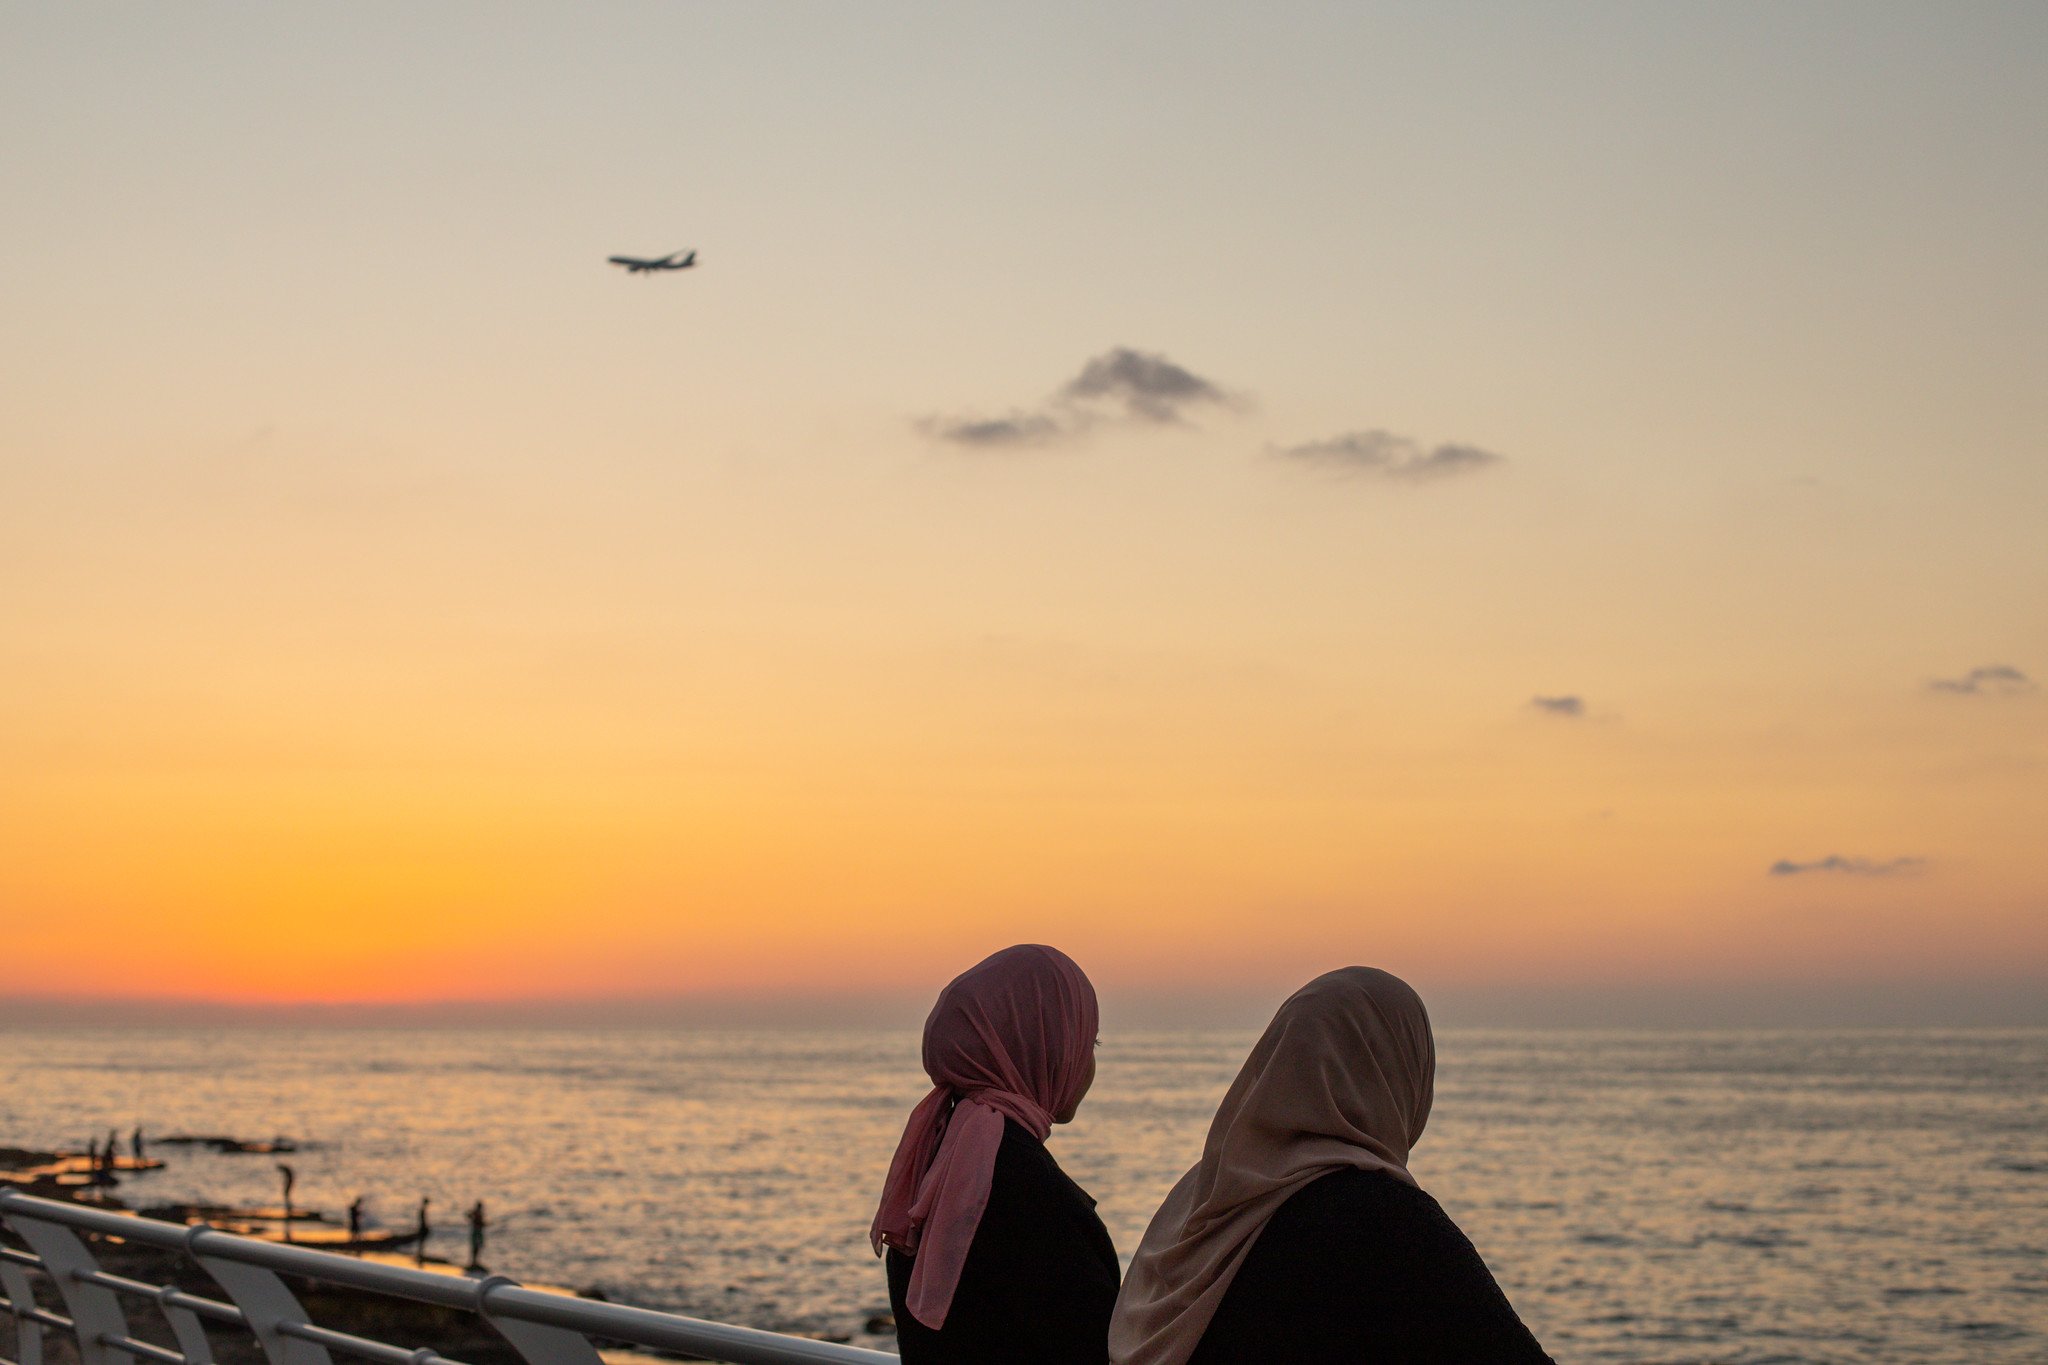 Two local women enjoying the sunset on the Corniche of Beirut.